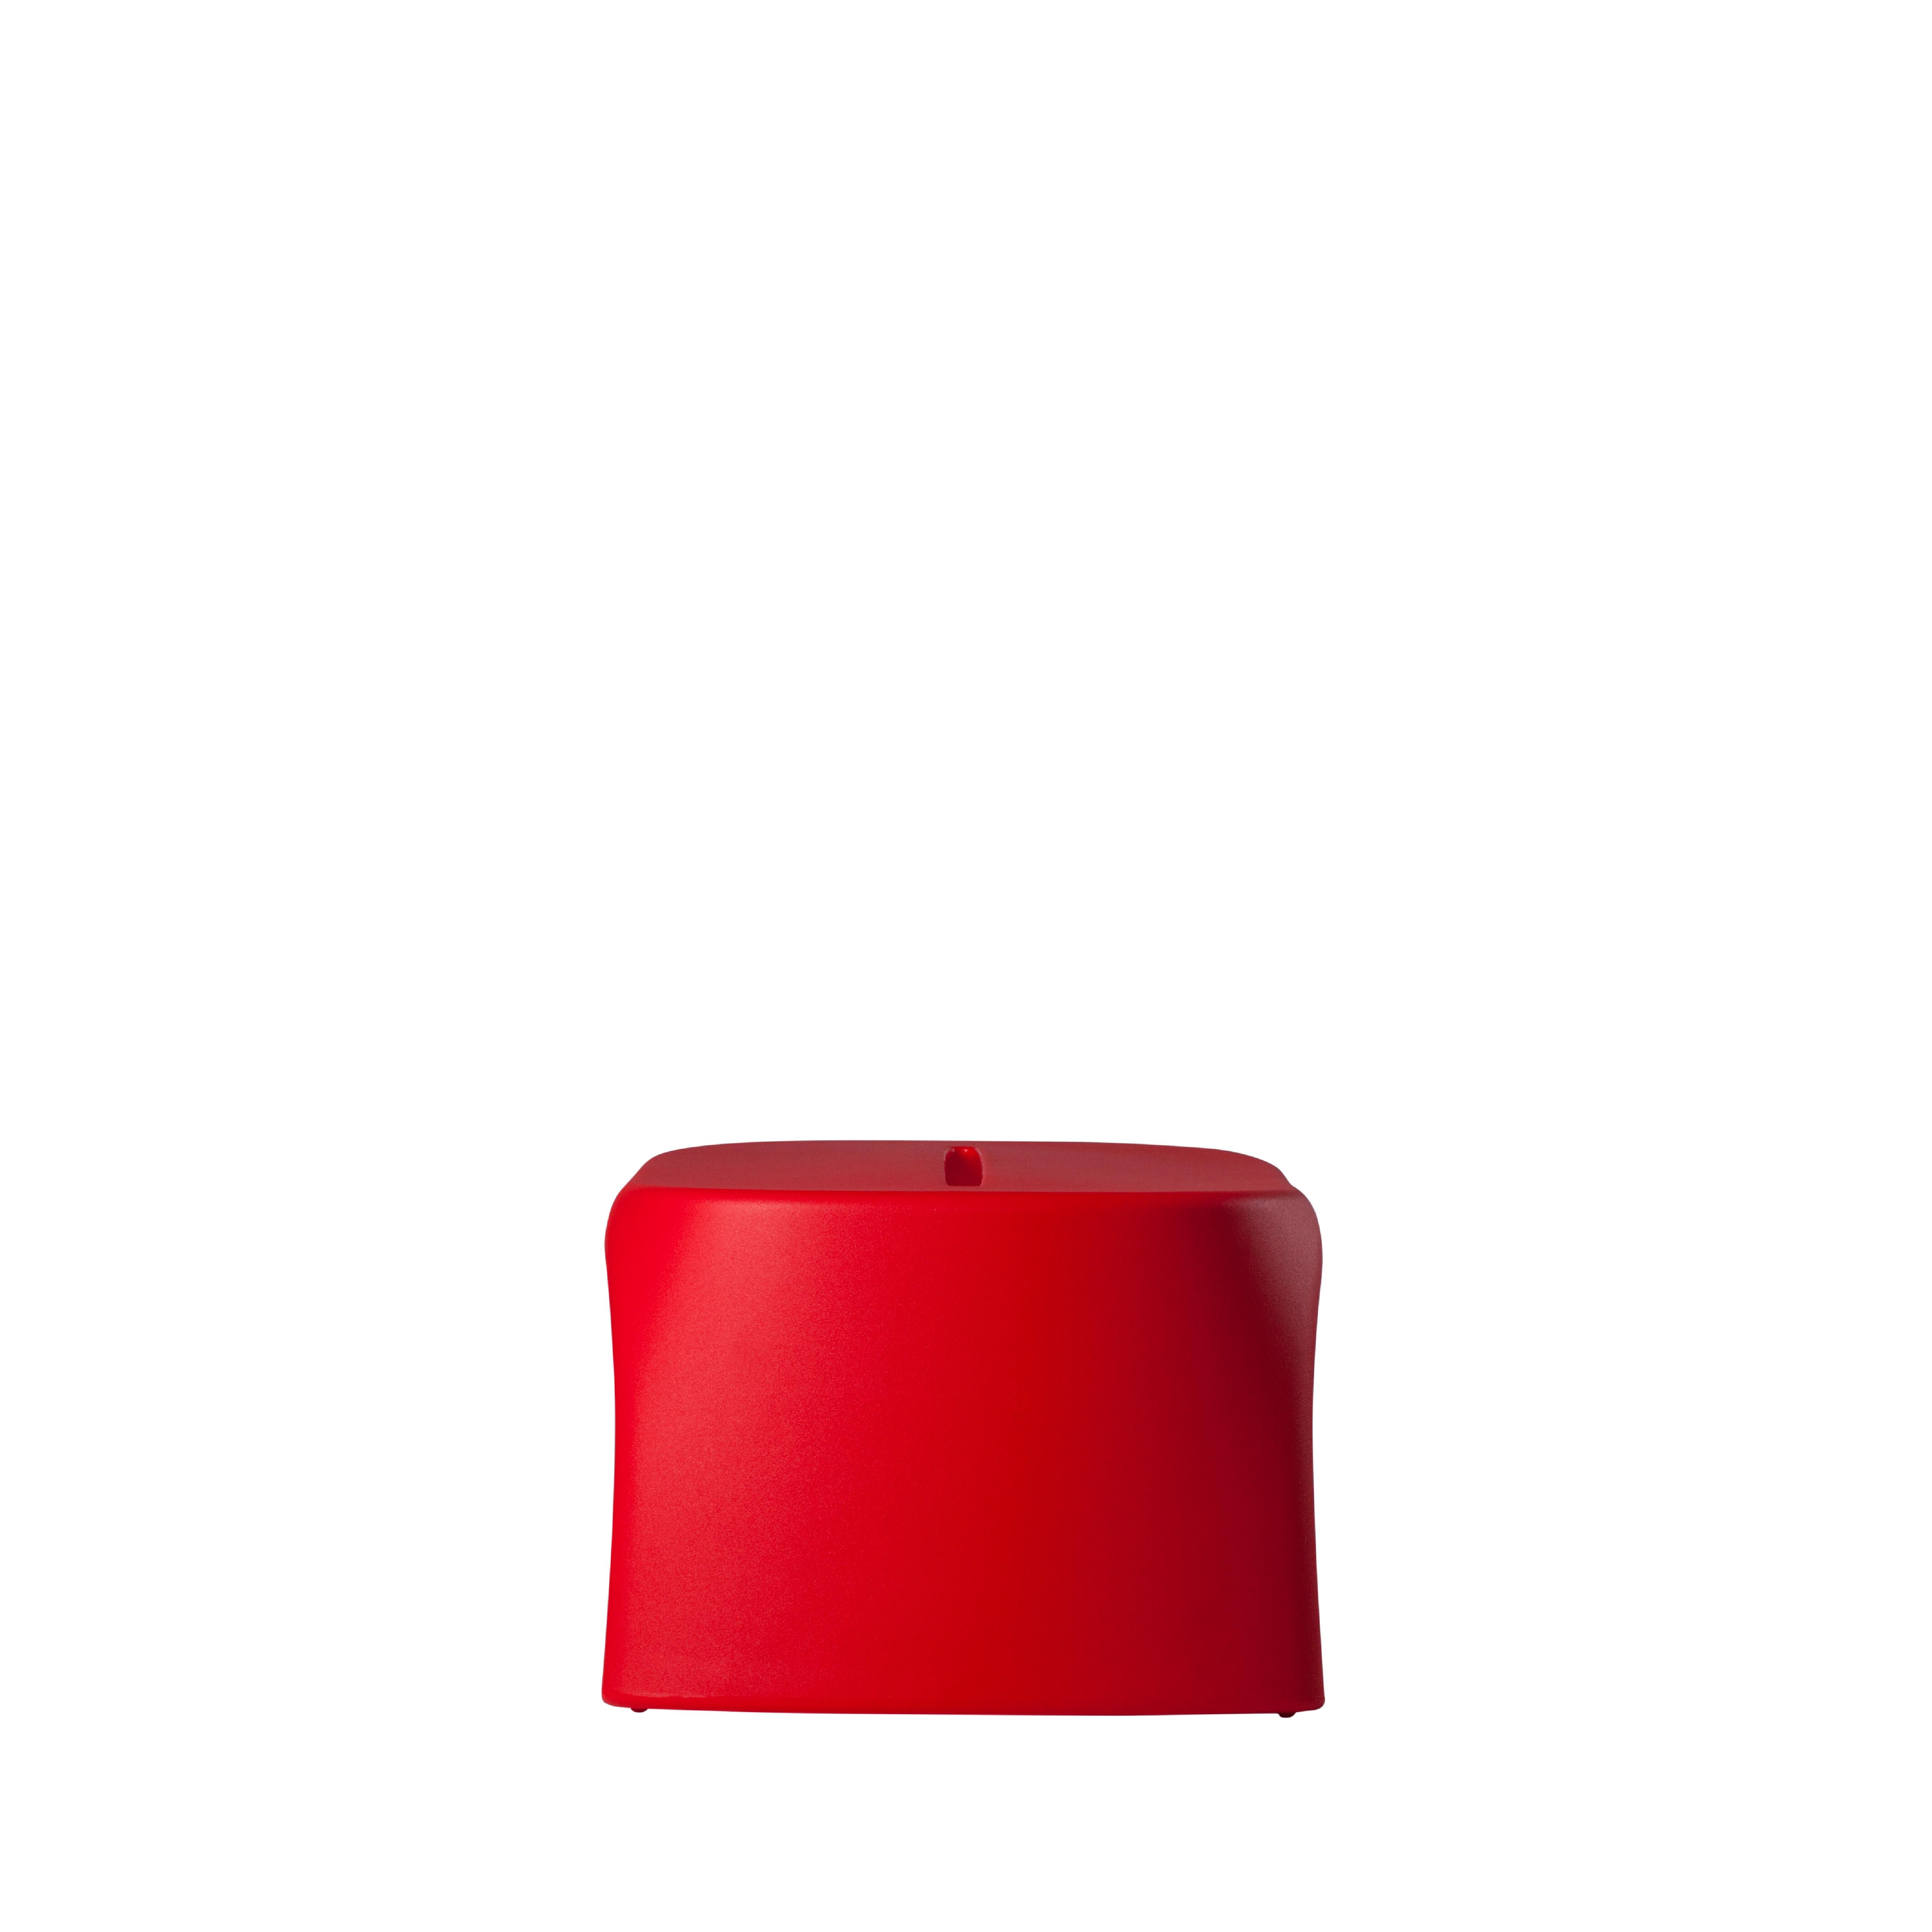 Flame Red Amélie Panchetta Bench by Italo Pertichini
Dimensions: D 60 x W 108 x H 43 cm.
Materials: Polyethylene.
Weight: 11 kg.

Available in a standard version and lacquered version. Prices may vary. Available in different color options. This